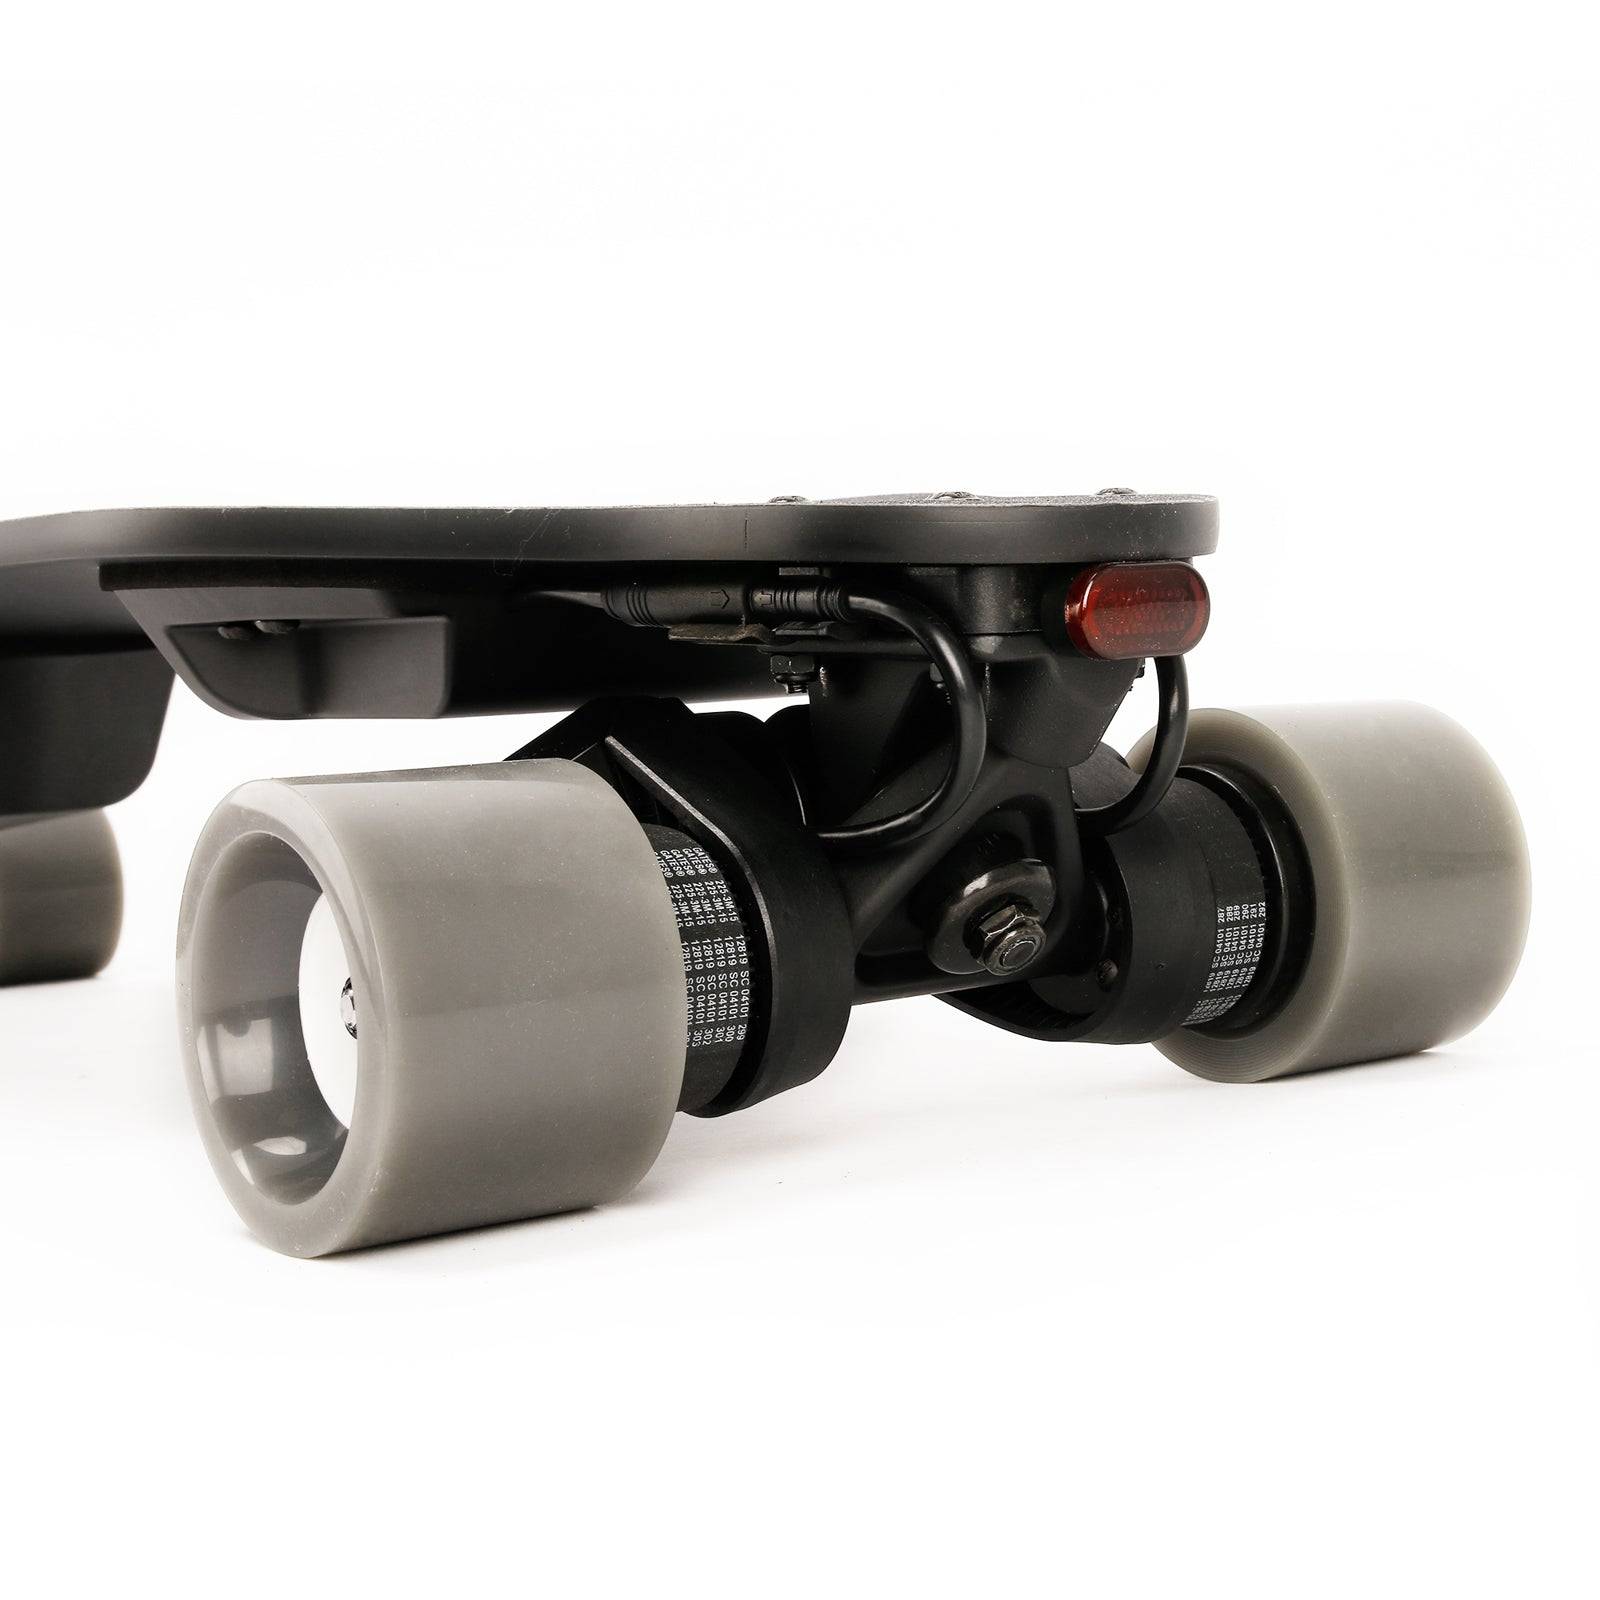 FAST & FURIOUS Electric Skateboard 600W dual belt motors with remote control top speed 25MPH, 19 miles range longboard